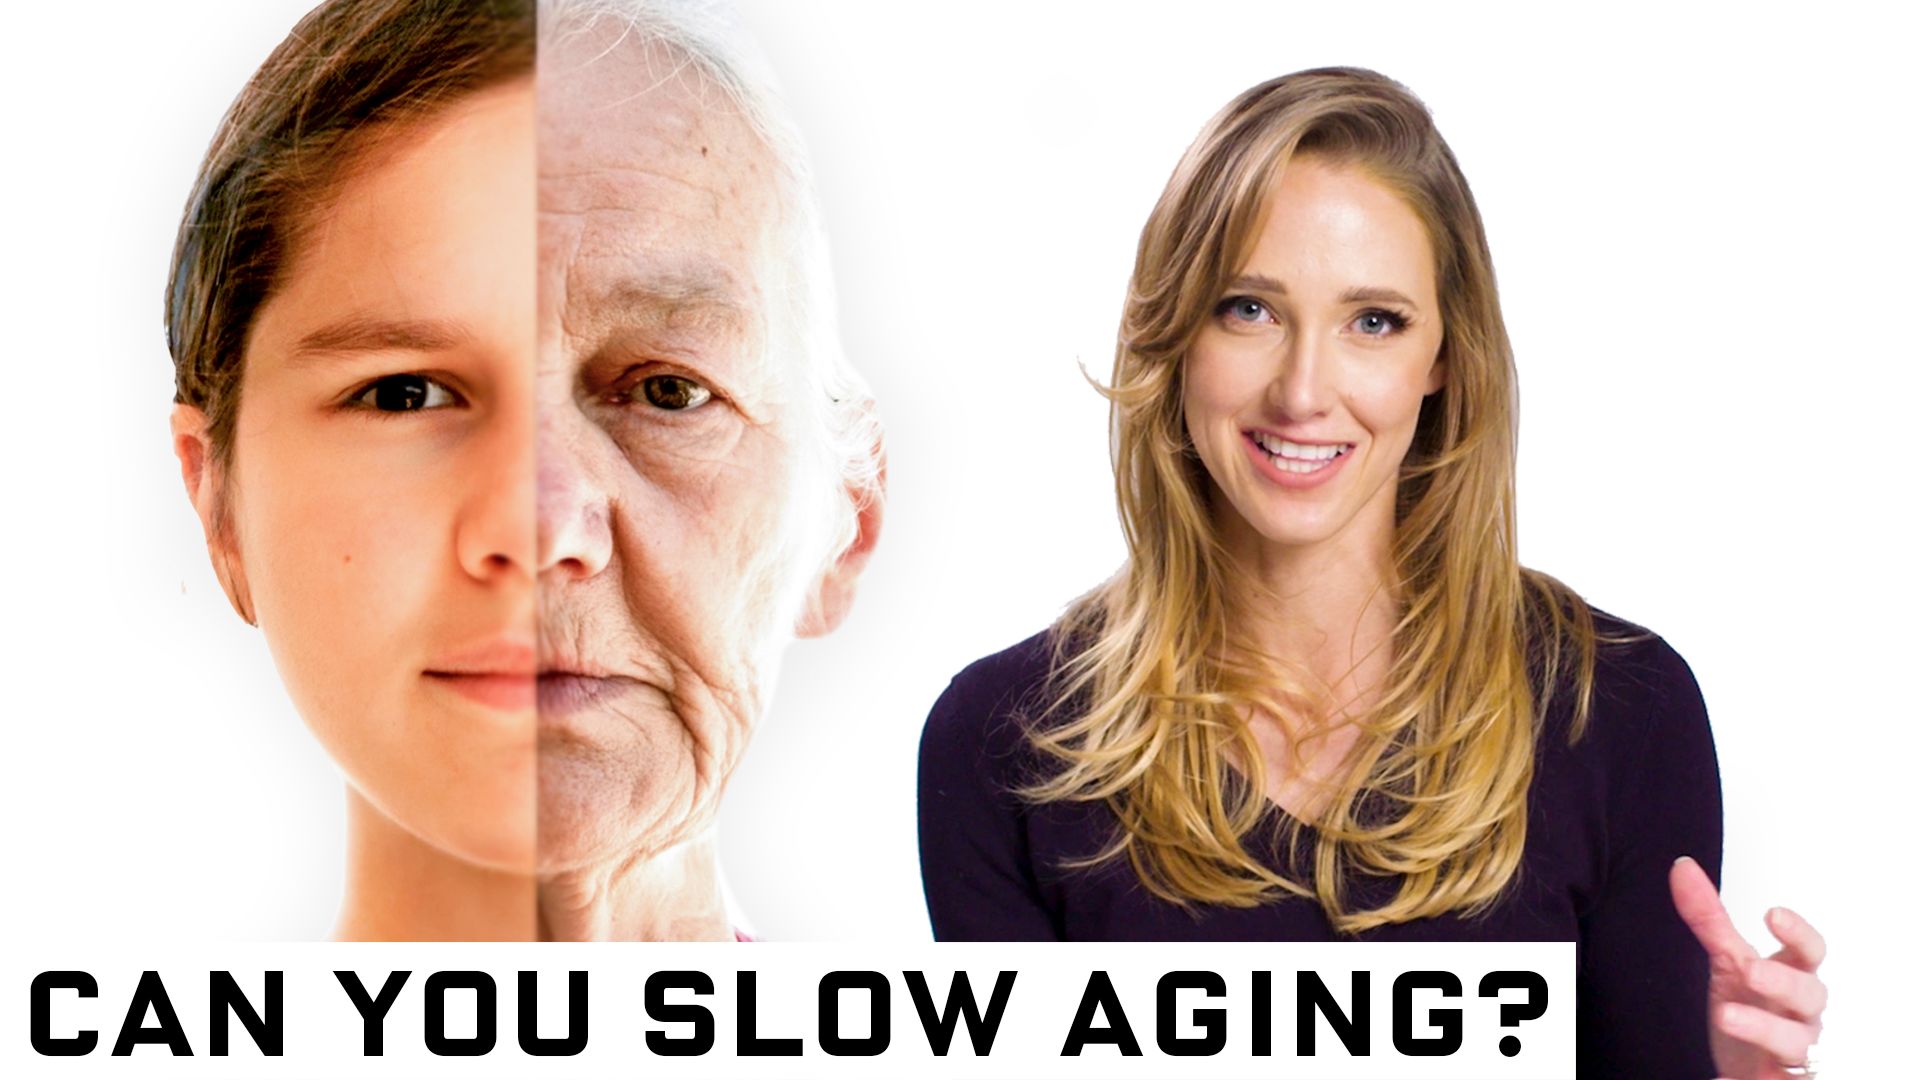 12 ways on how to age slowly